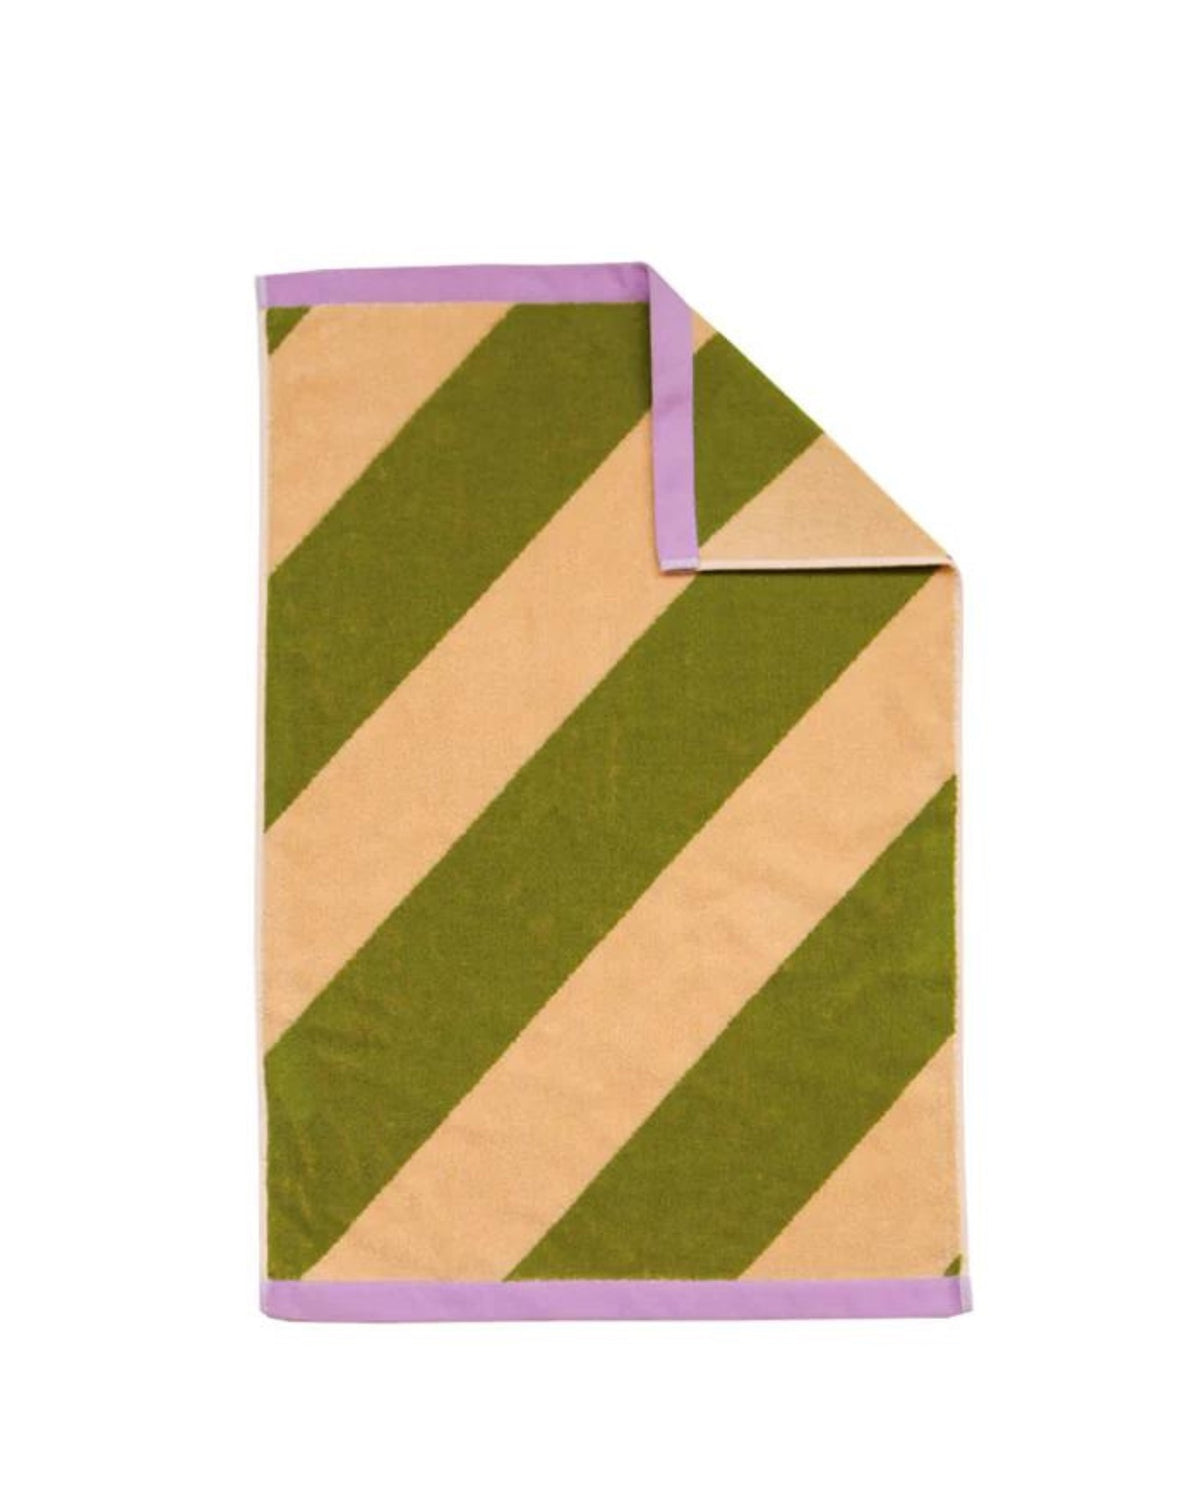 Add this playful bold stripe hand towel to your kids' bathrooms. The wide diagonal stripe in Pistachio and Cream with a lilac trim adds personality and fun to this fun style.